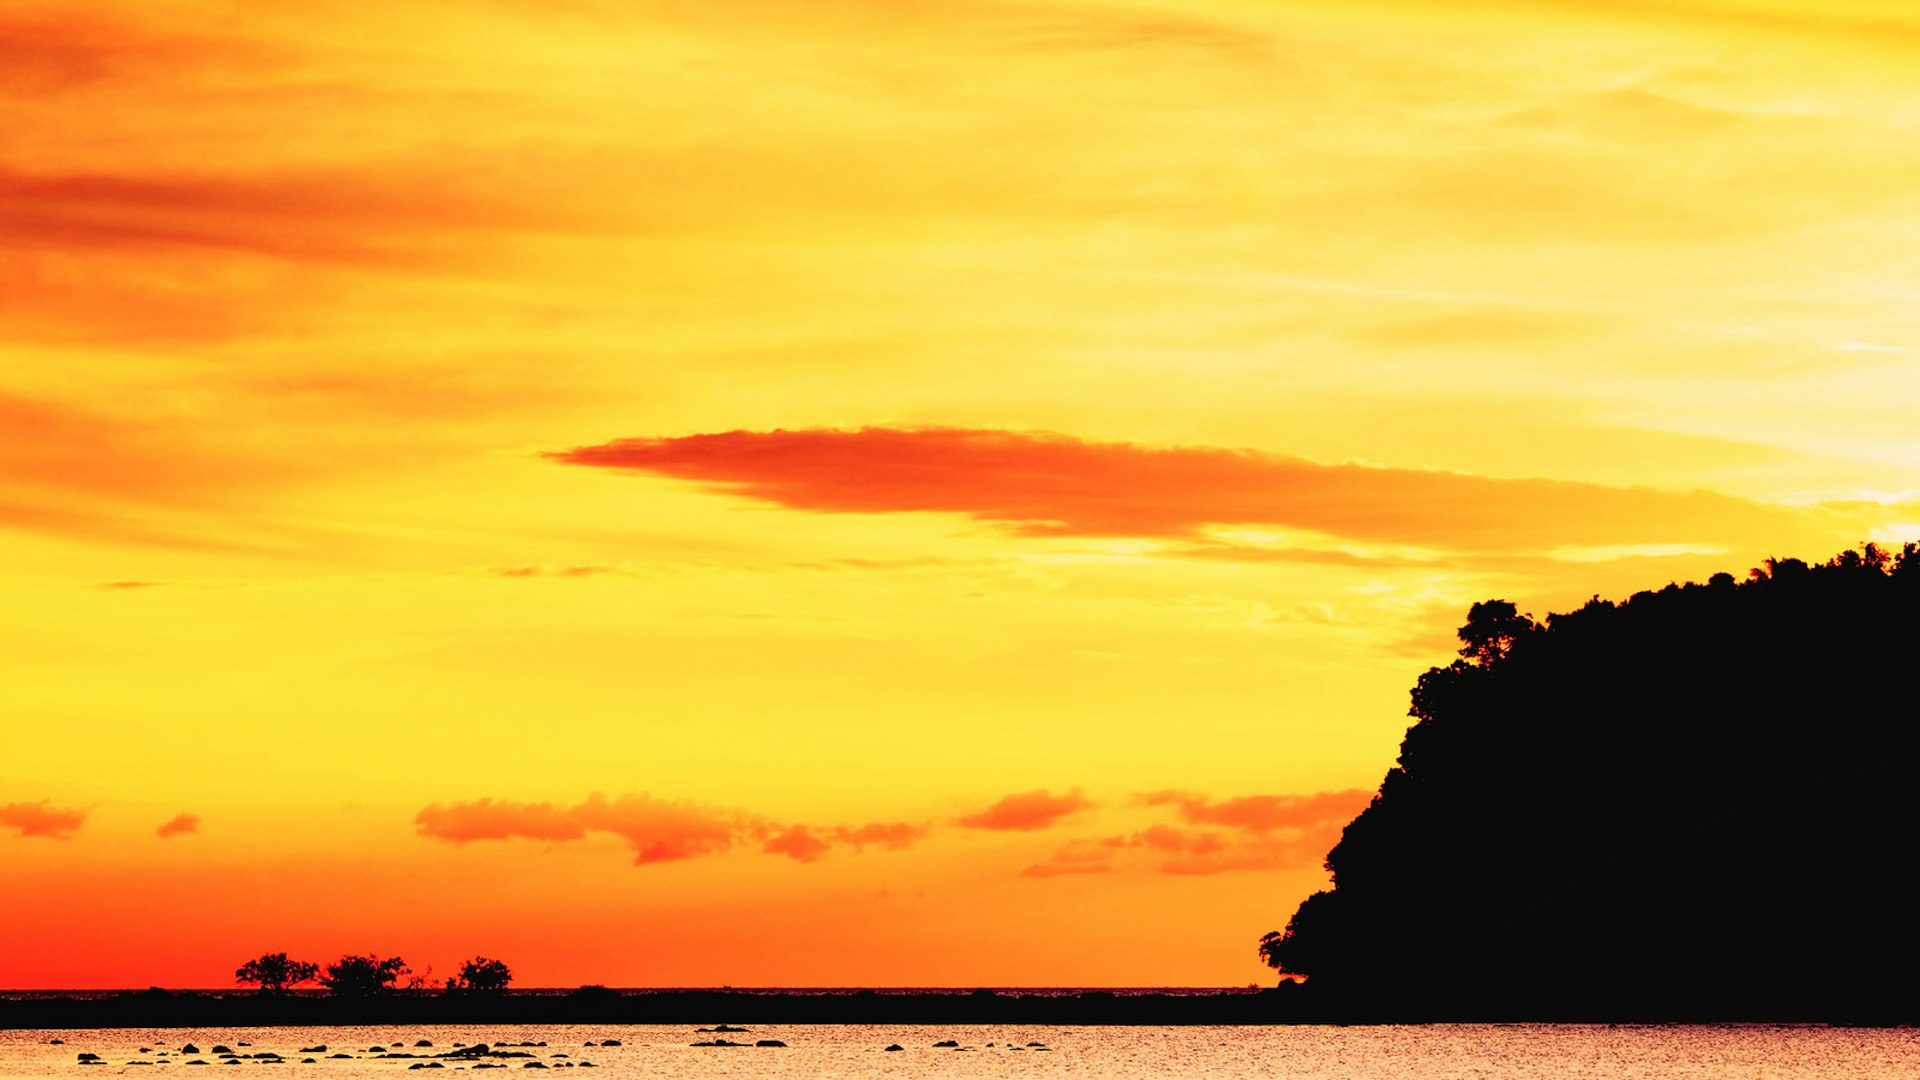 Sunset over the Andaman Sea at Koh Libong © Petr Malyshev / Getty Images